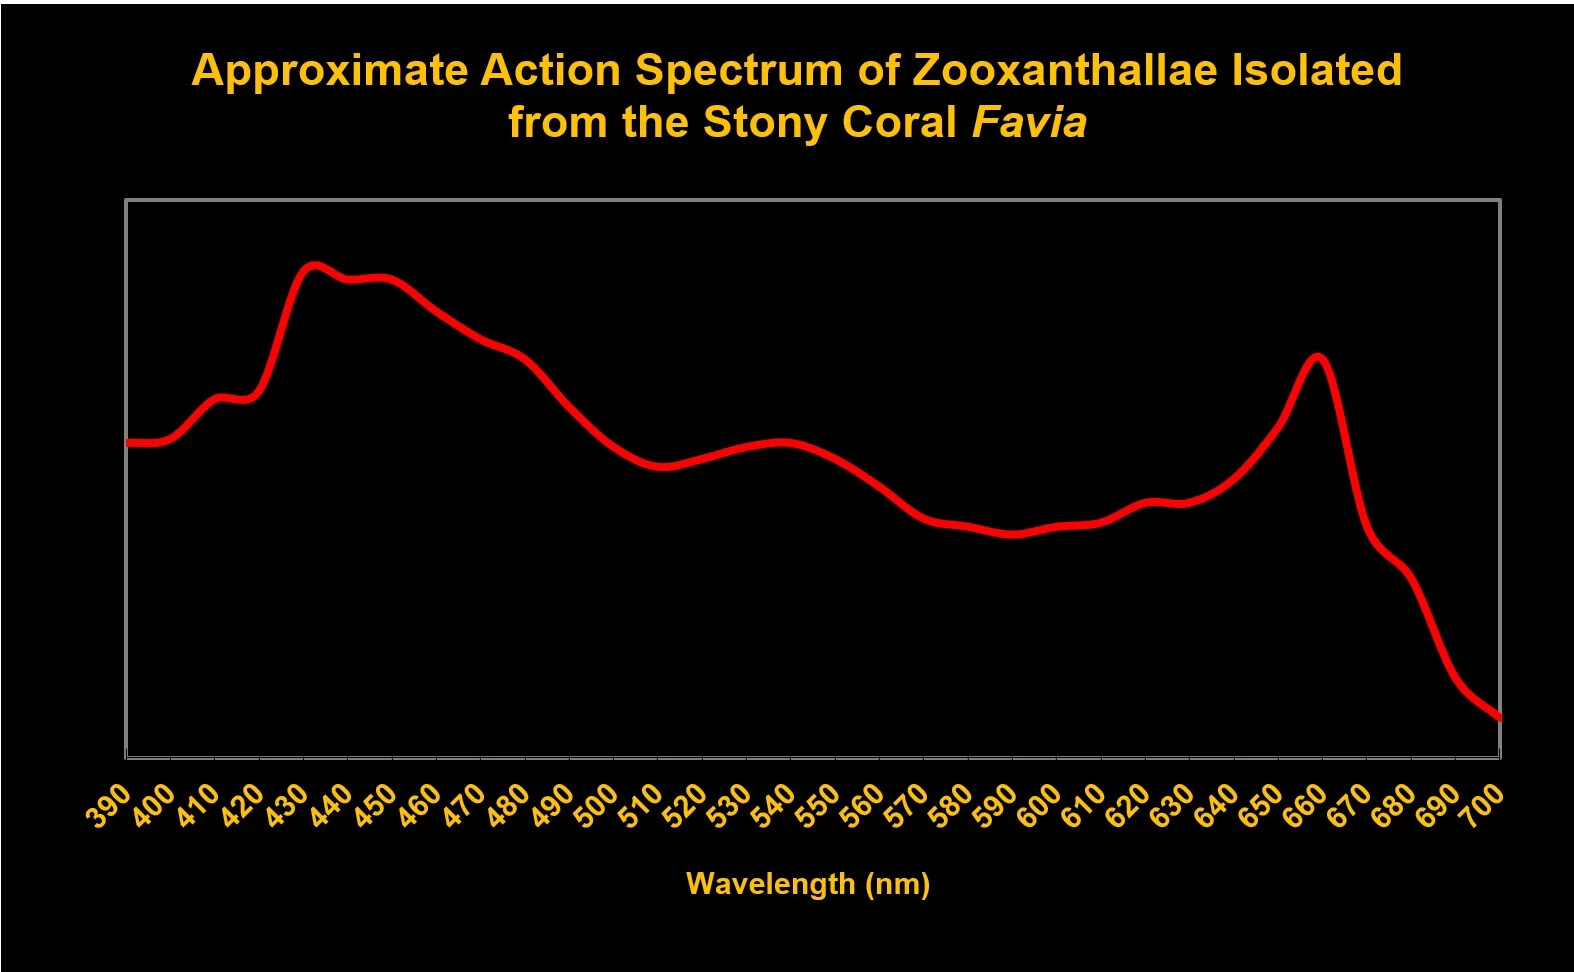 Figure 1. Oxygen production by zooxanthellae isolated from the stony coral Favia by wavelength. The 